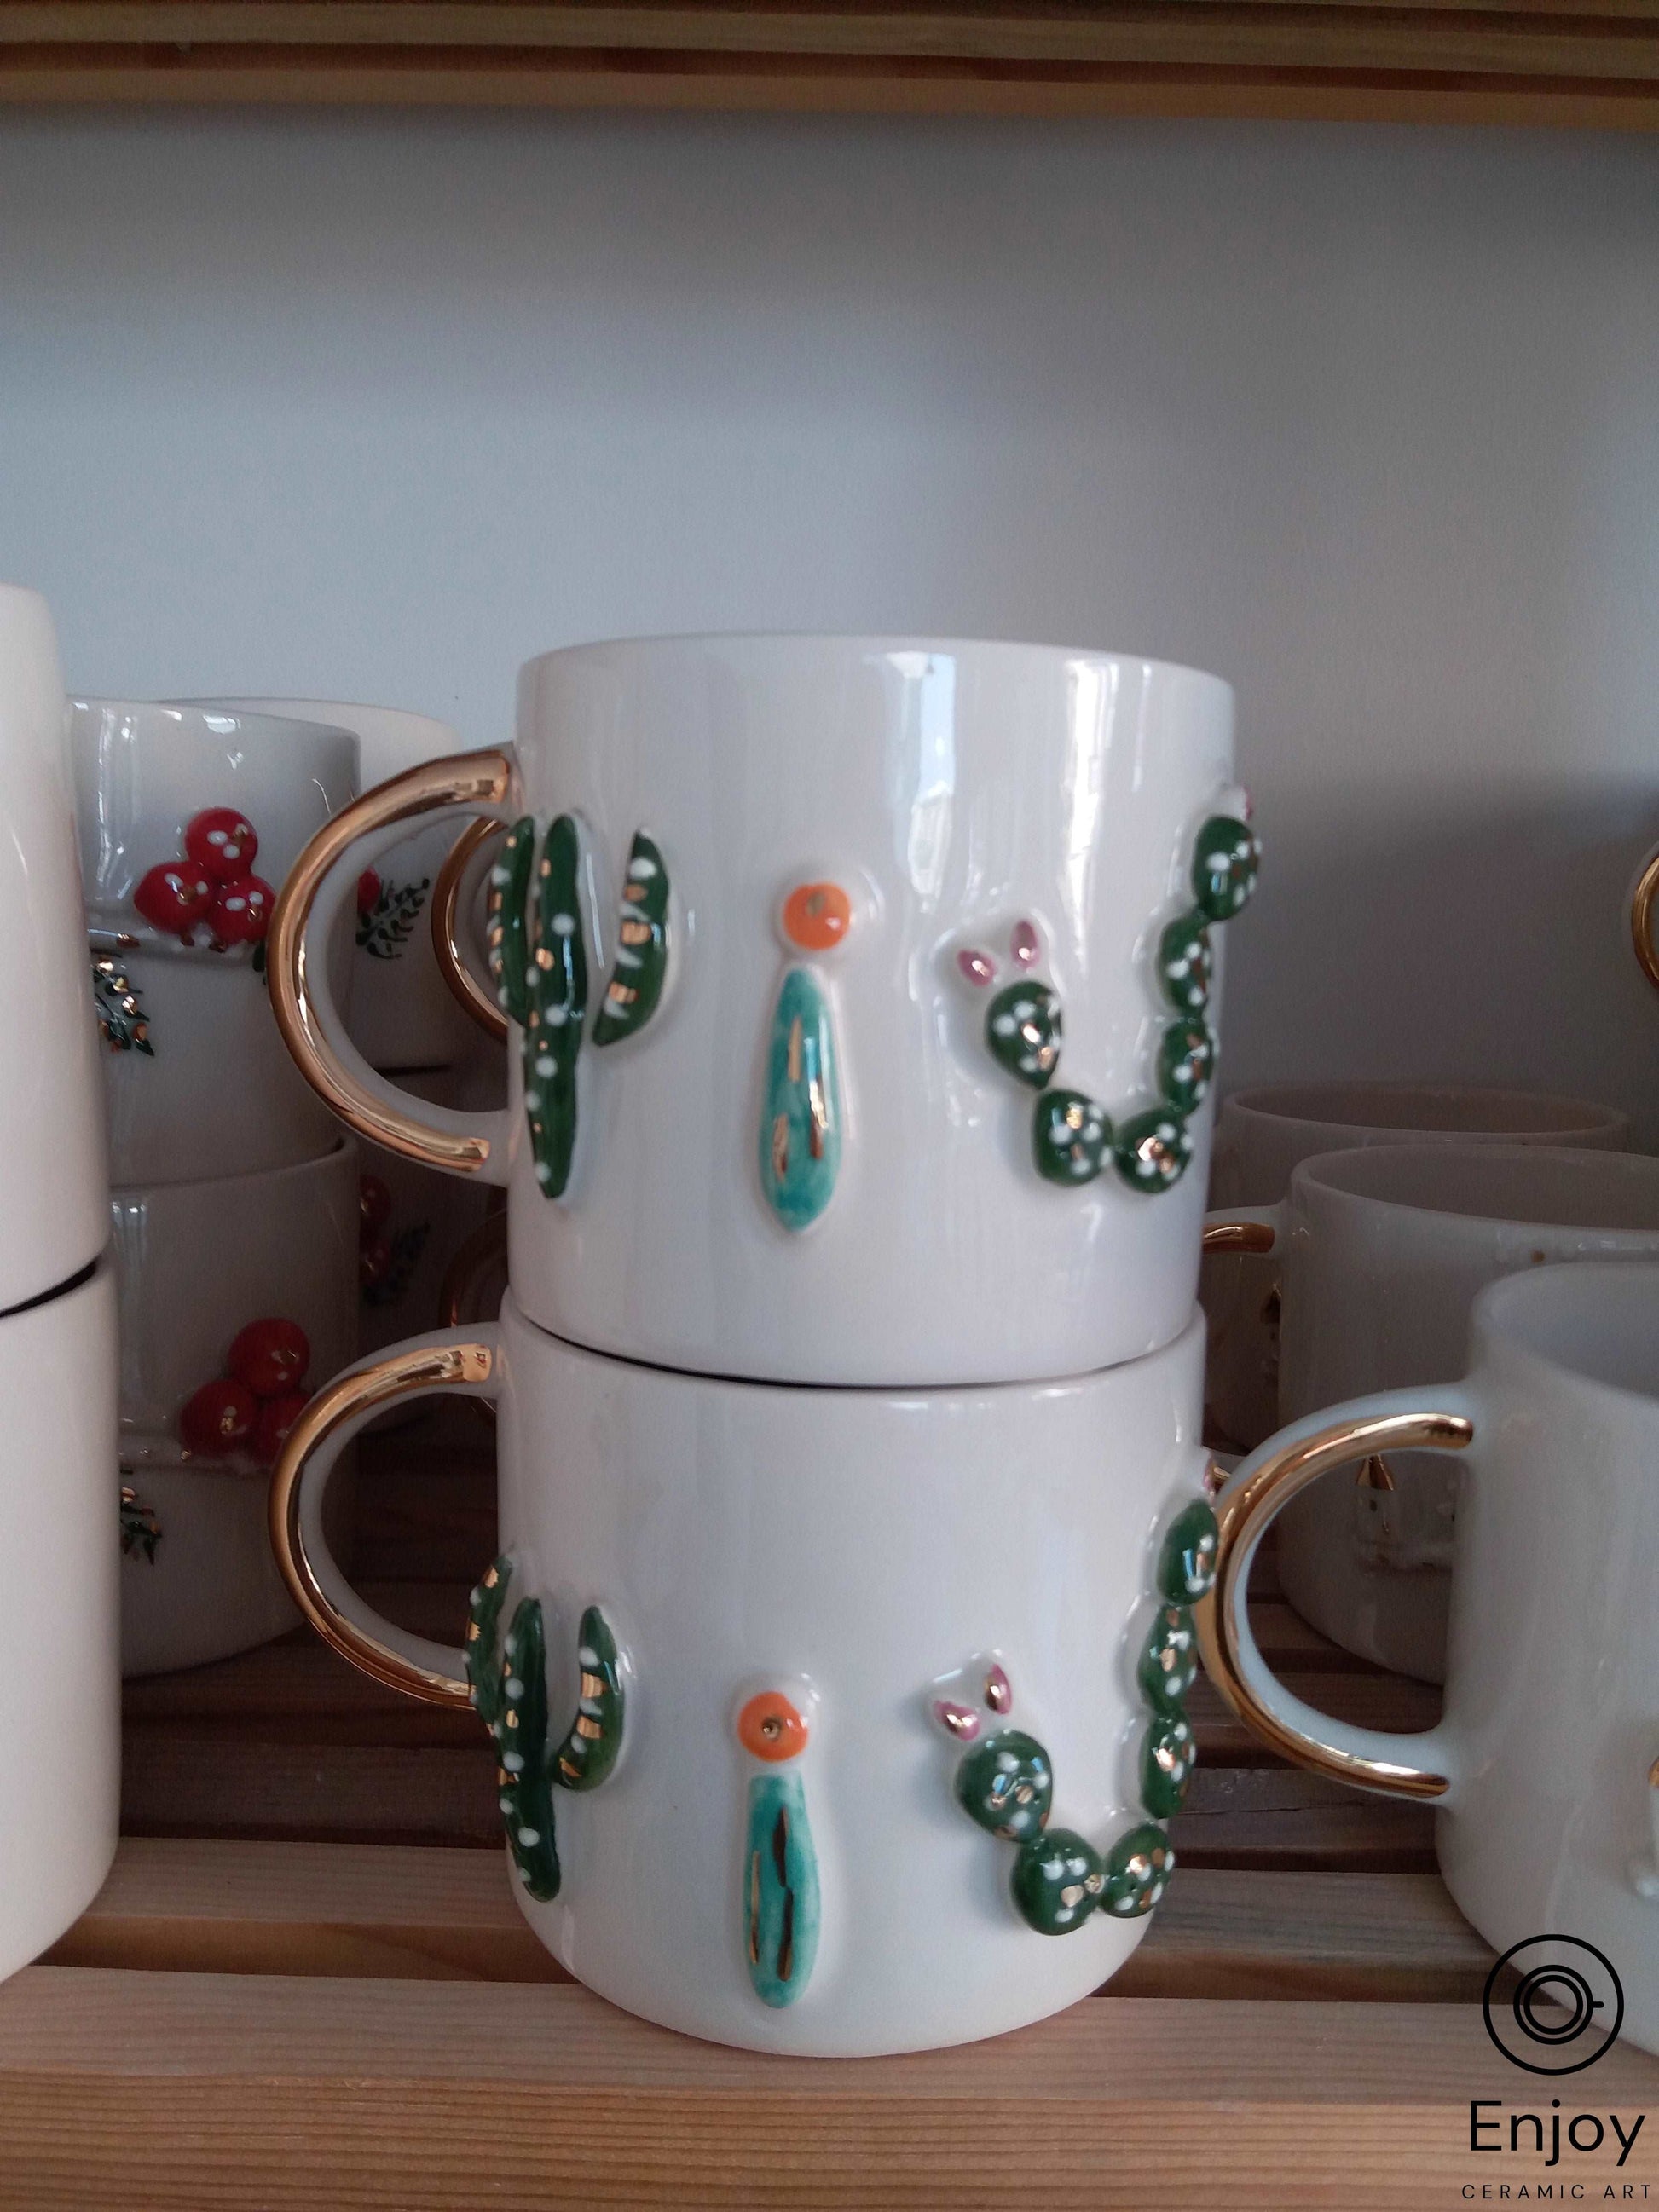 Stacked white mugs with gold handles, adorned with 3D cactus designs and tiny colorful blooms on a wooden shelf.